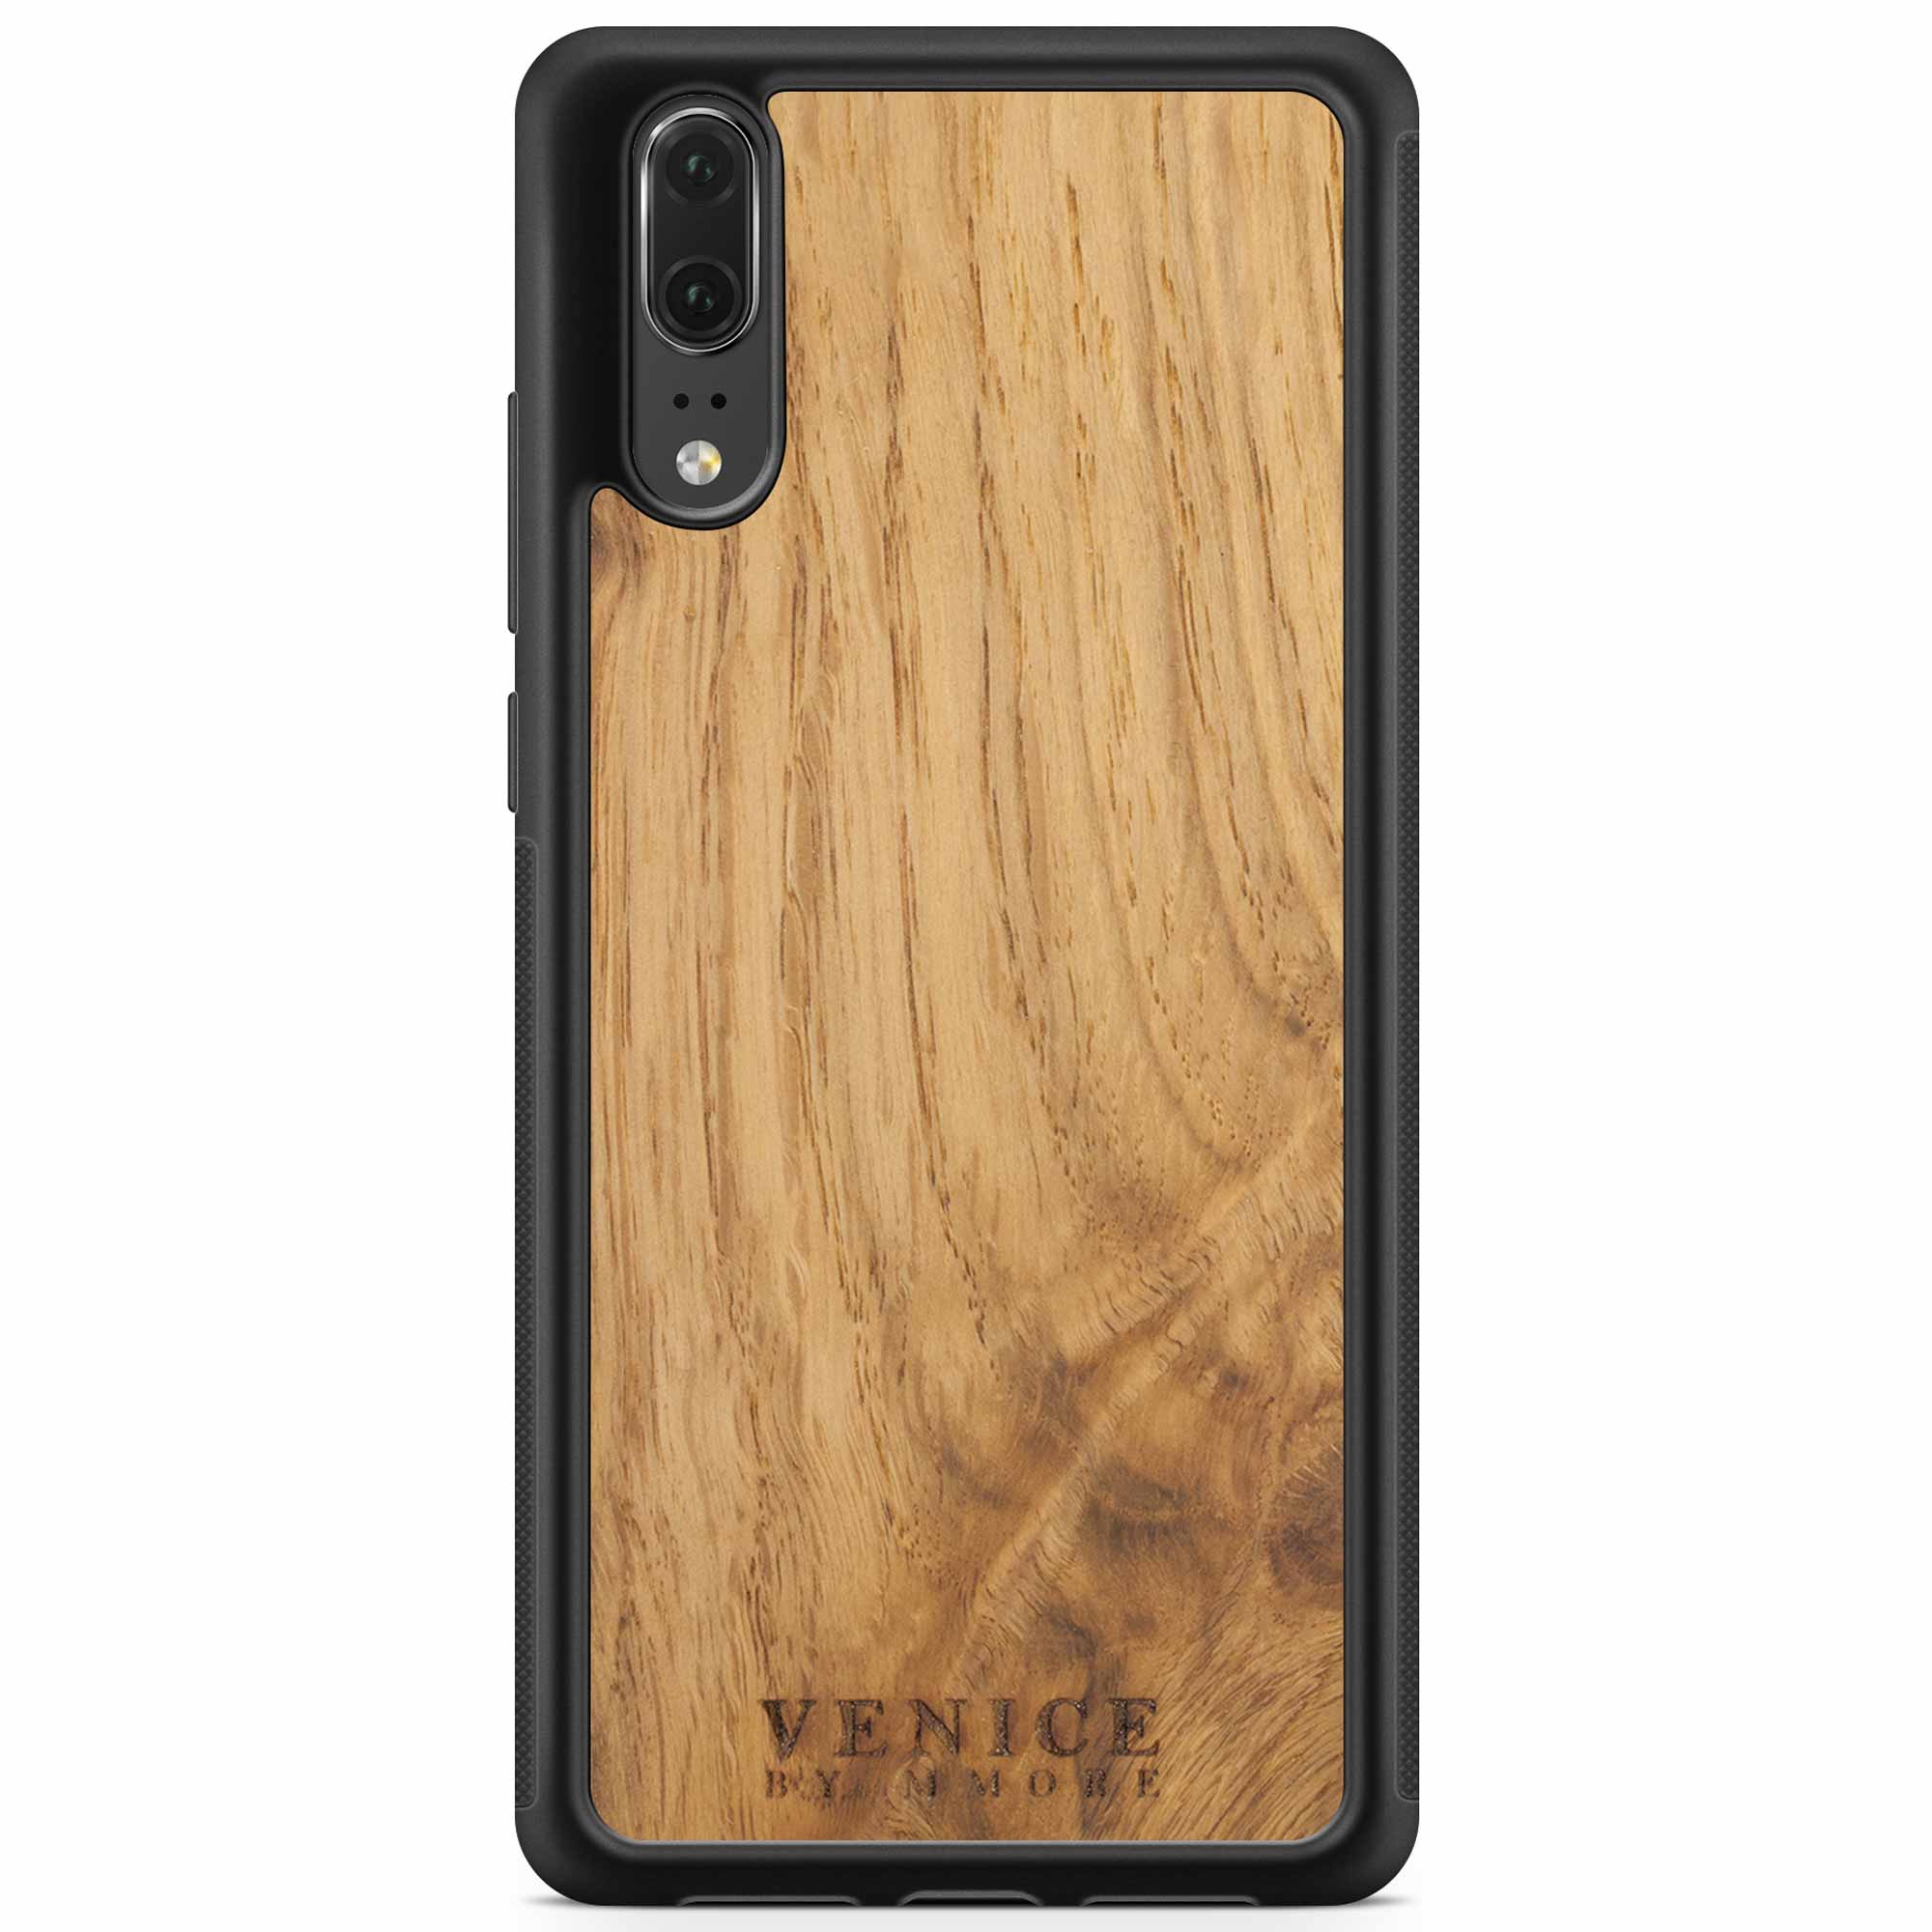 Venice Lettering Wood Phone Case Huawei P20